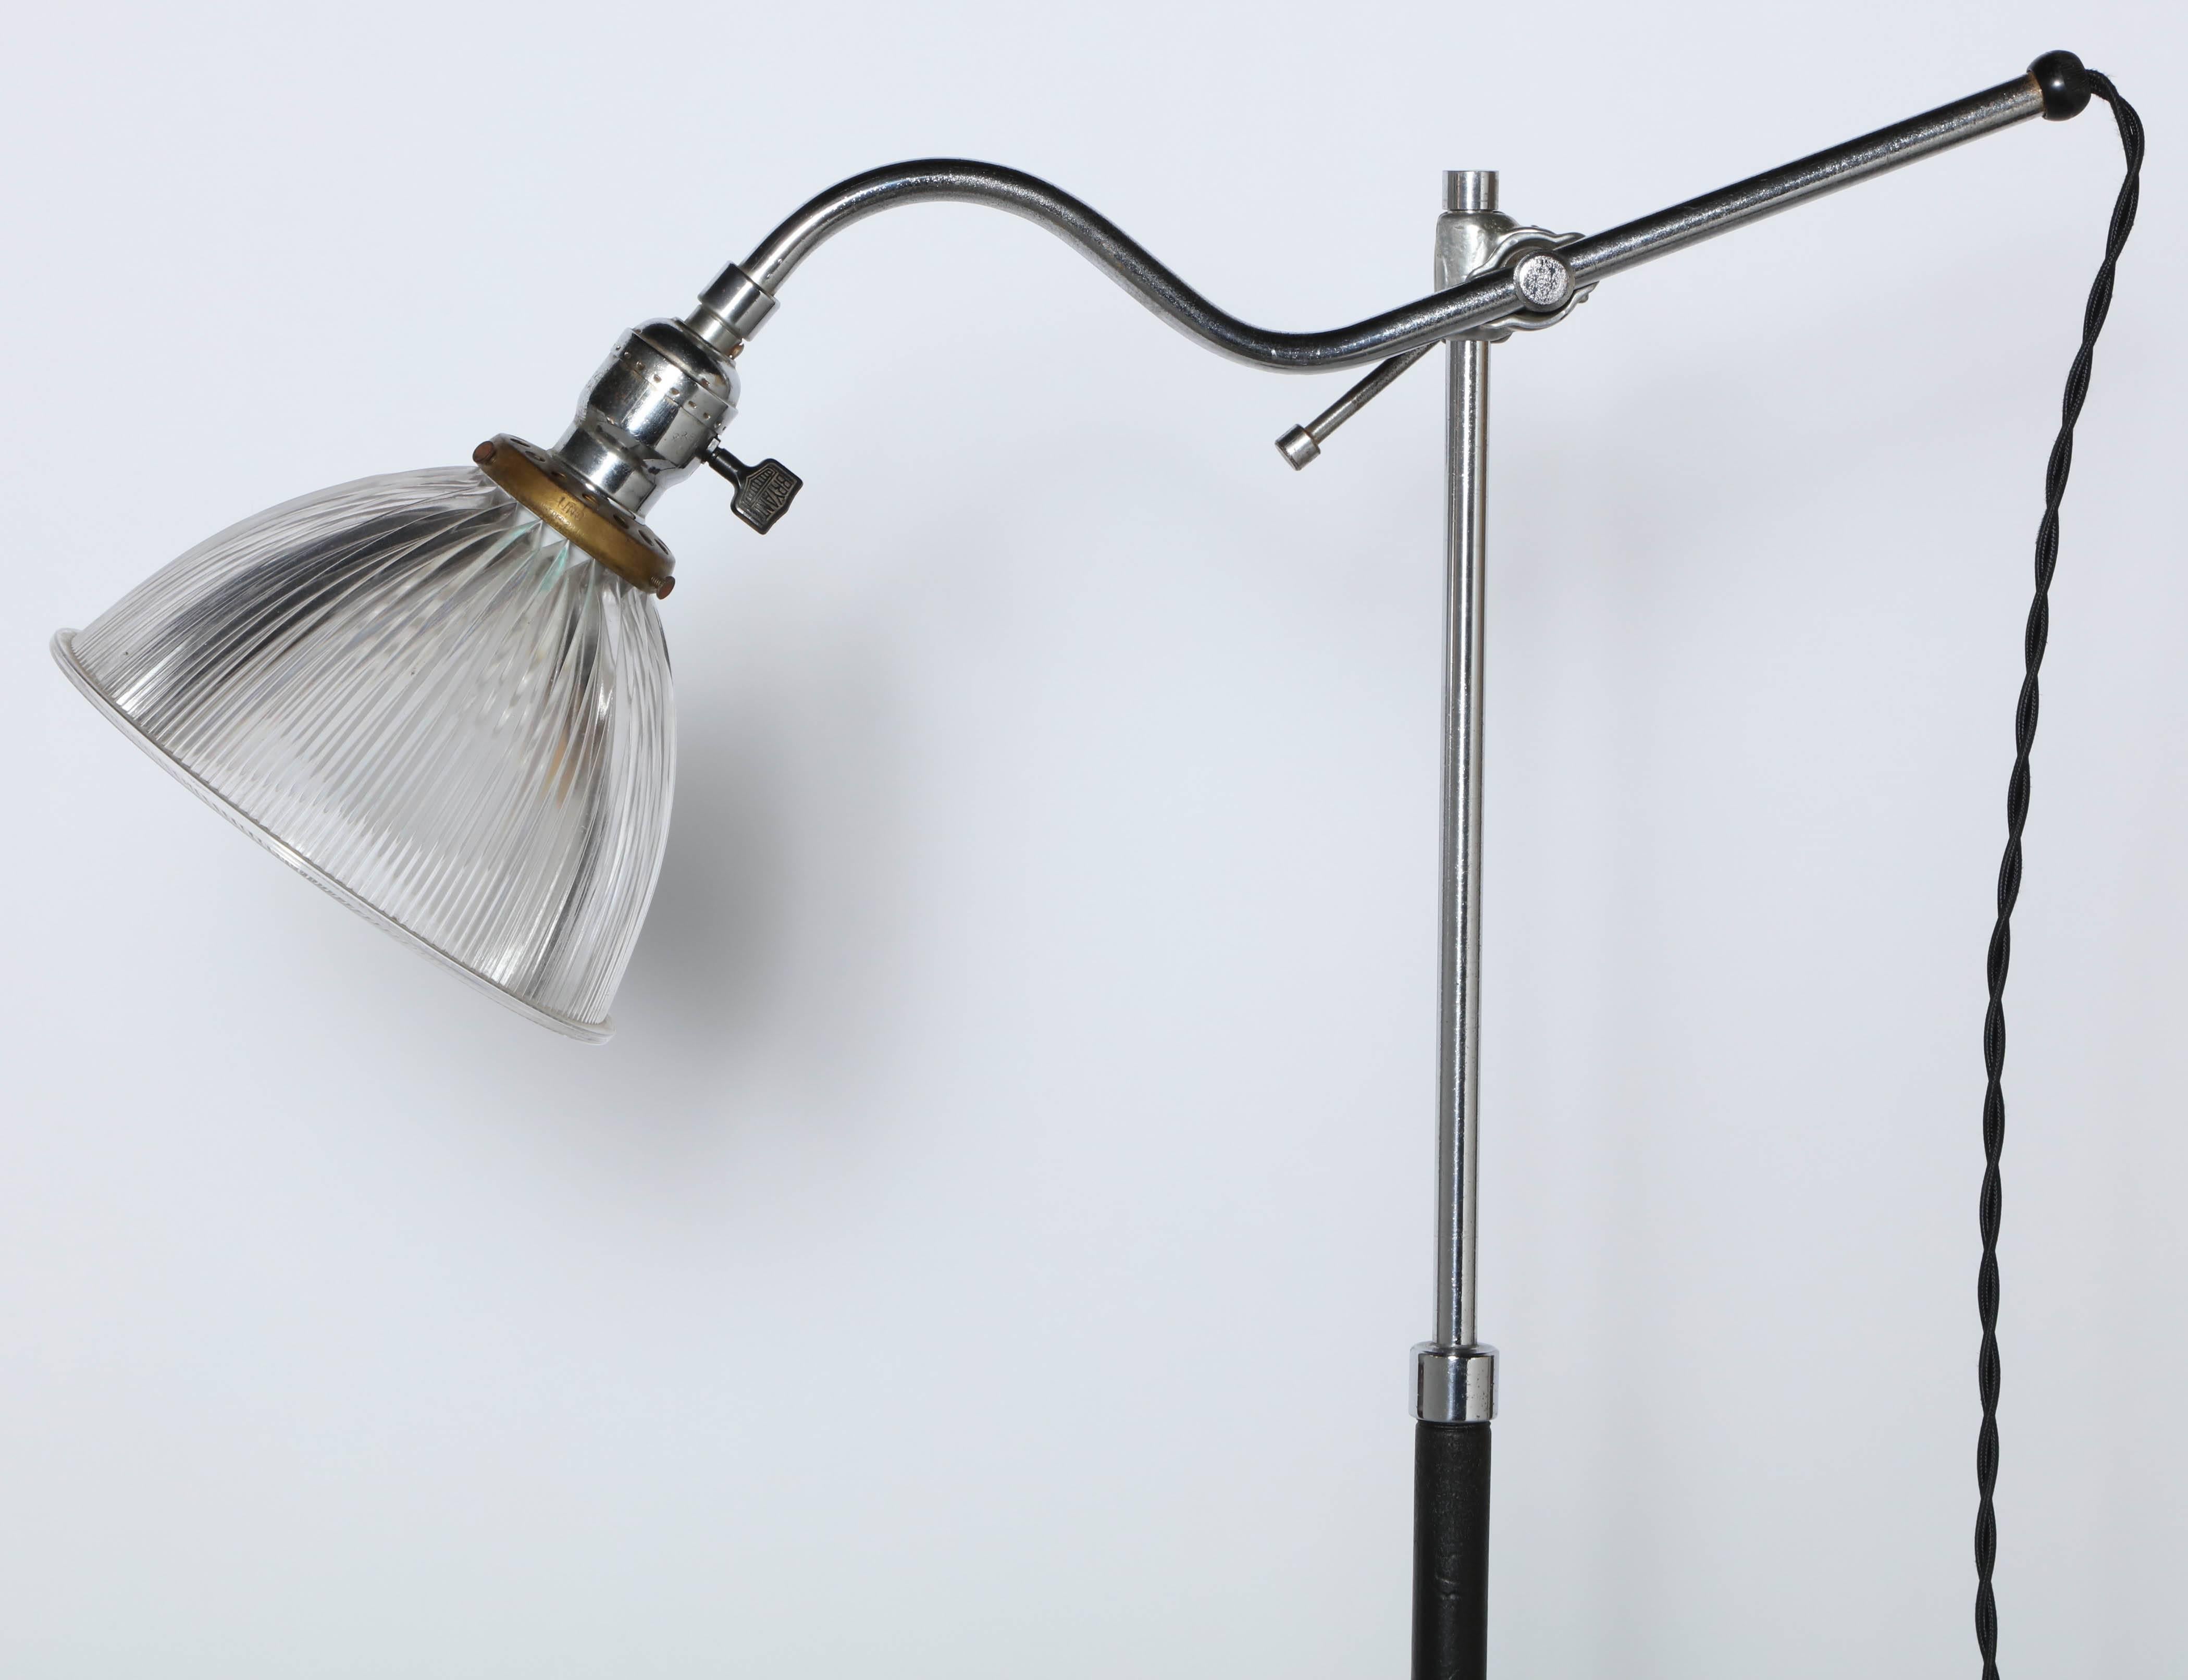 Early 20th century steel, chrome plate, cast iron and black column floor lamp with clear holophane glass shade. Featuring an articulating chromed steel arm, adjustable chromed steel and black enameled metal column, ribbed transparent holophane glass